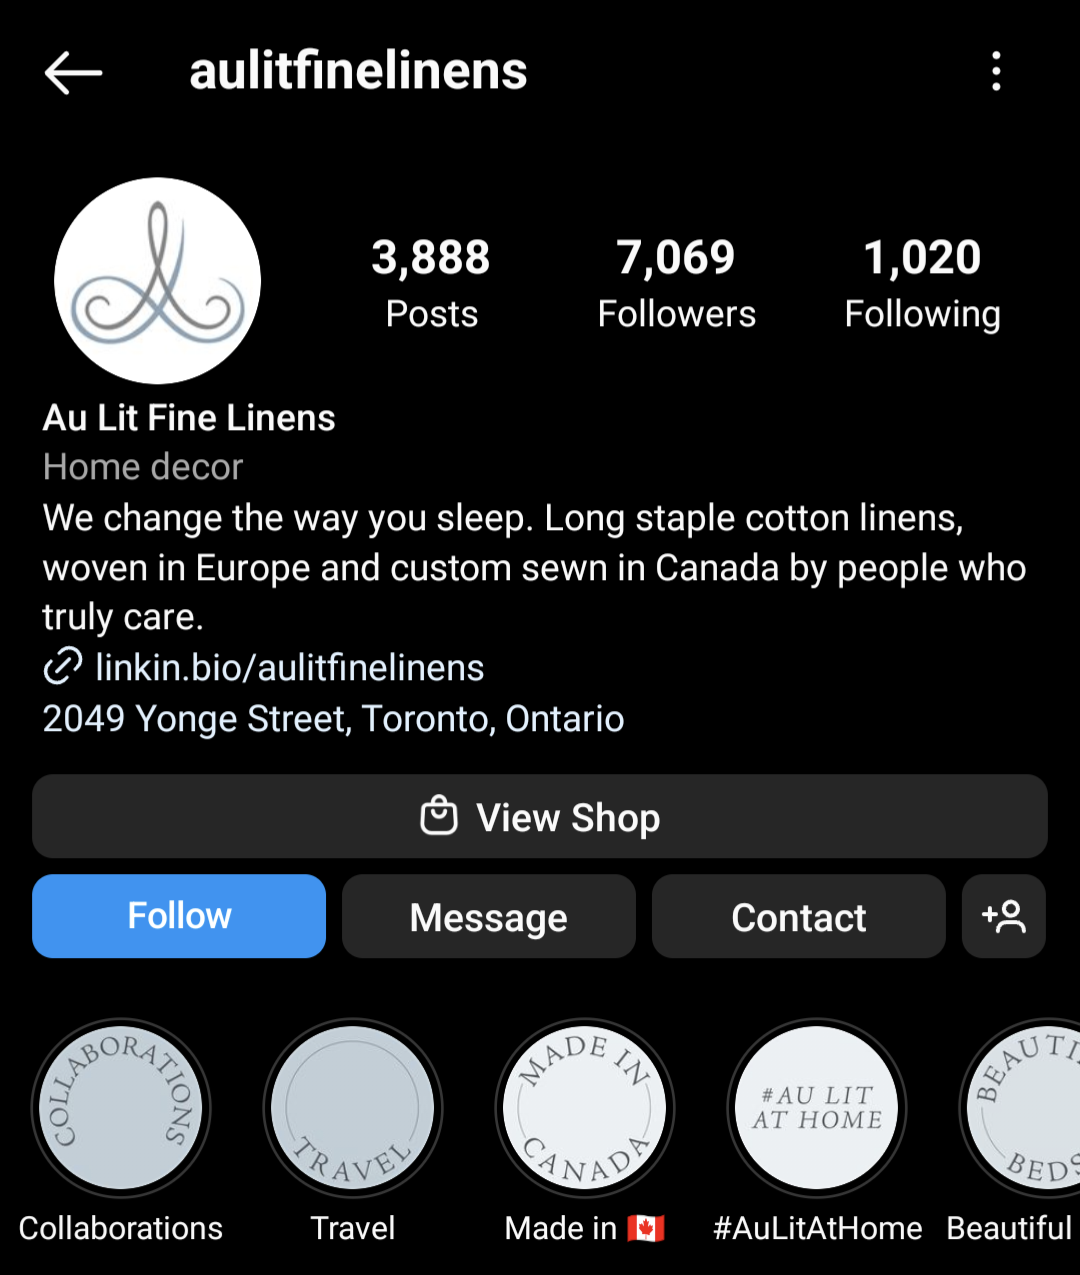 Au Lit Fine Linens uses a clean and simple aesthetic for its Instagram bio